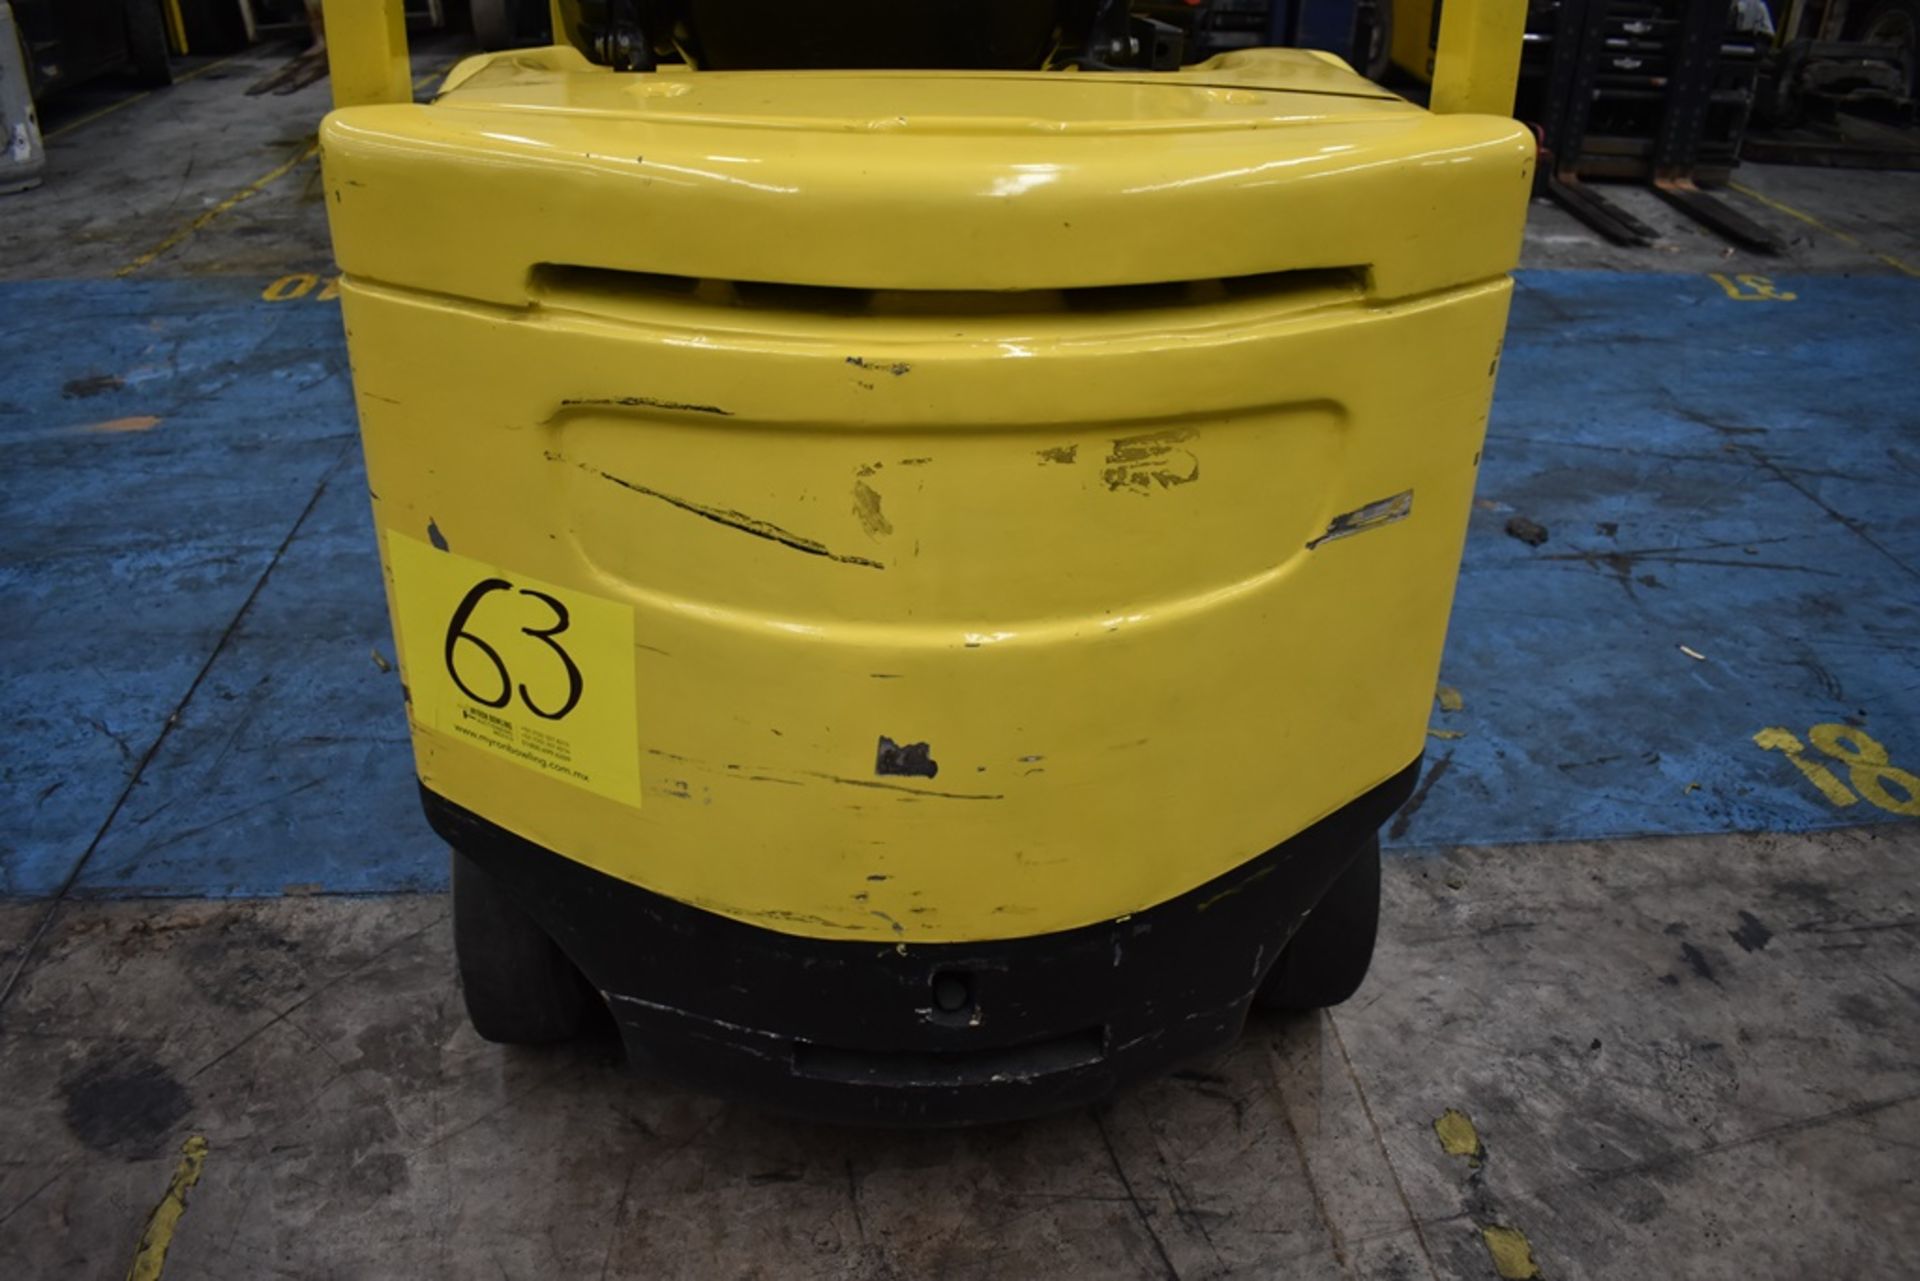 Hyster electric Forklift, model E50XN-27, capacity 4800 lb - Image 31 of 44